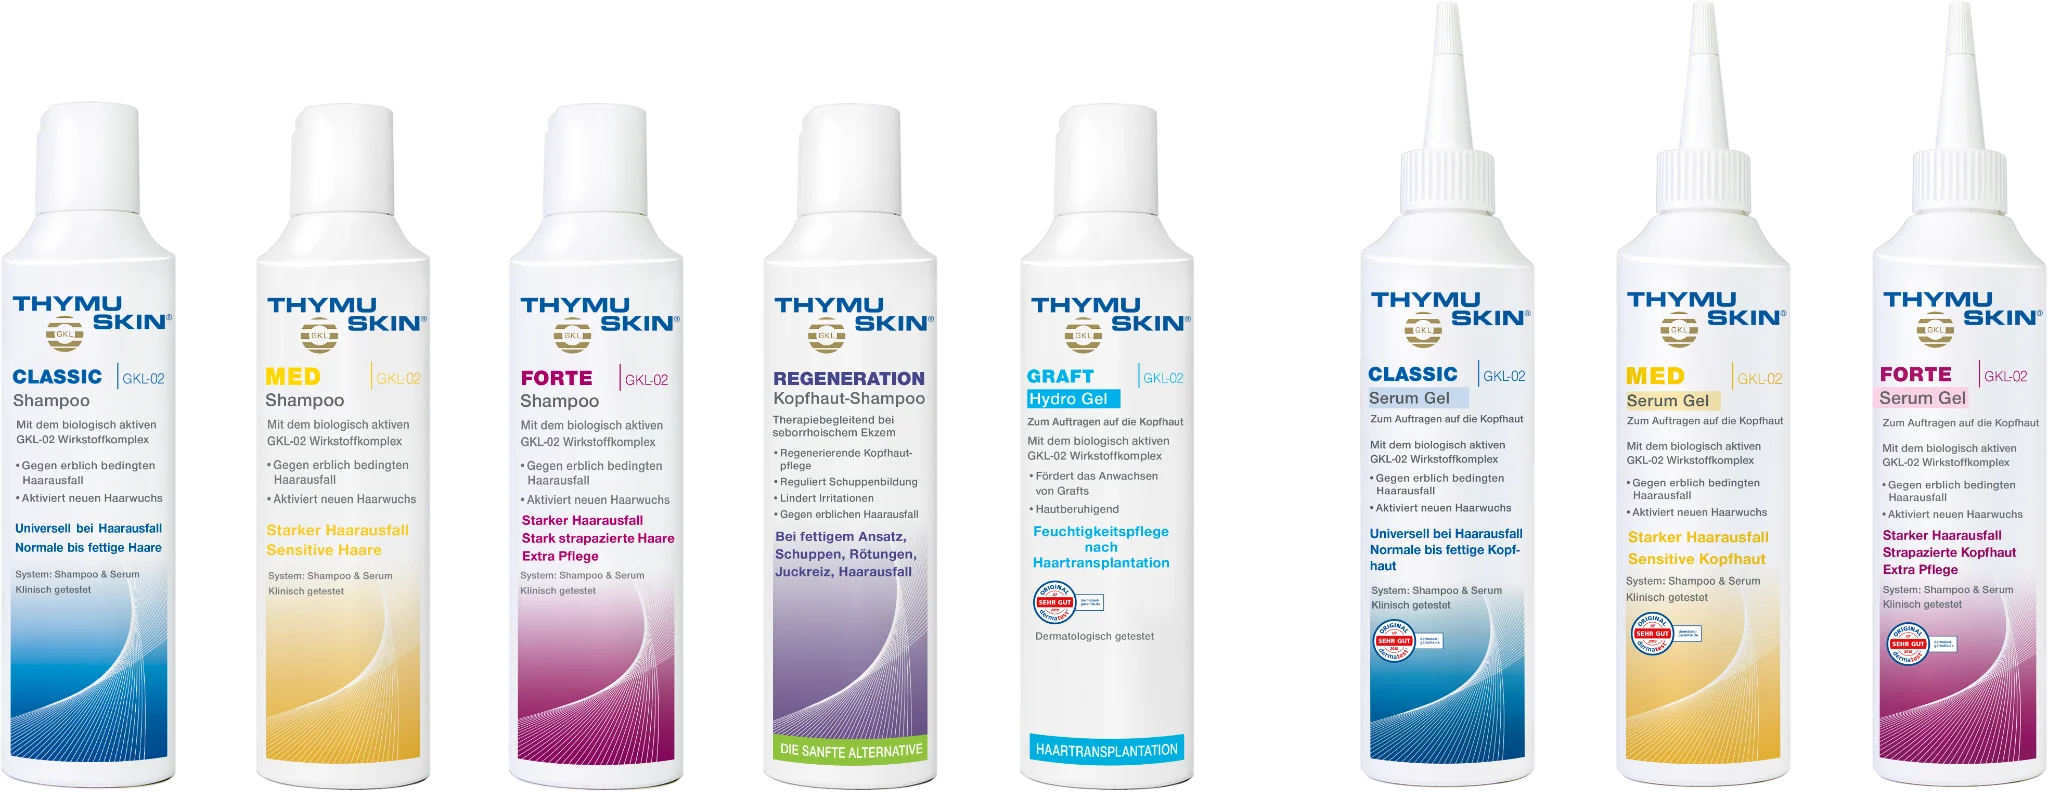 Thymuskin product lines